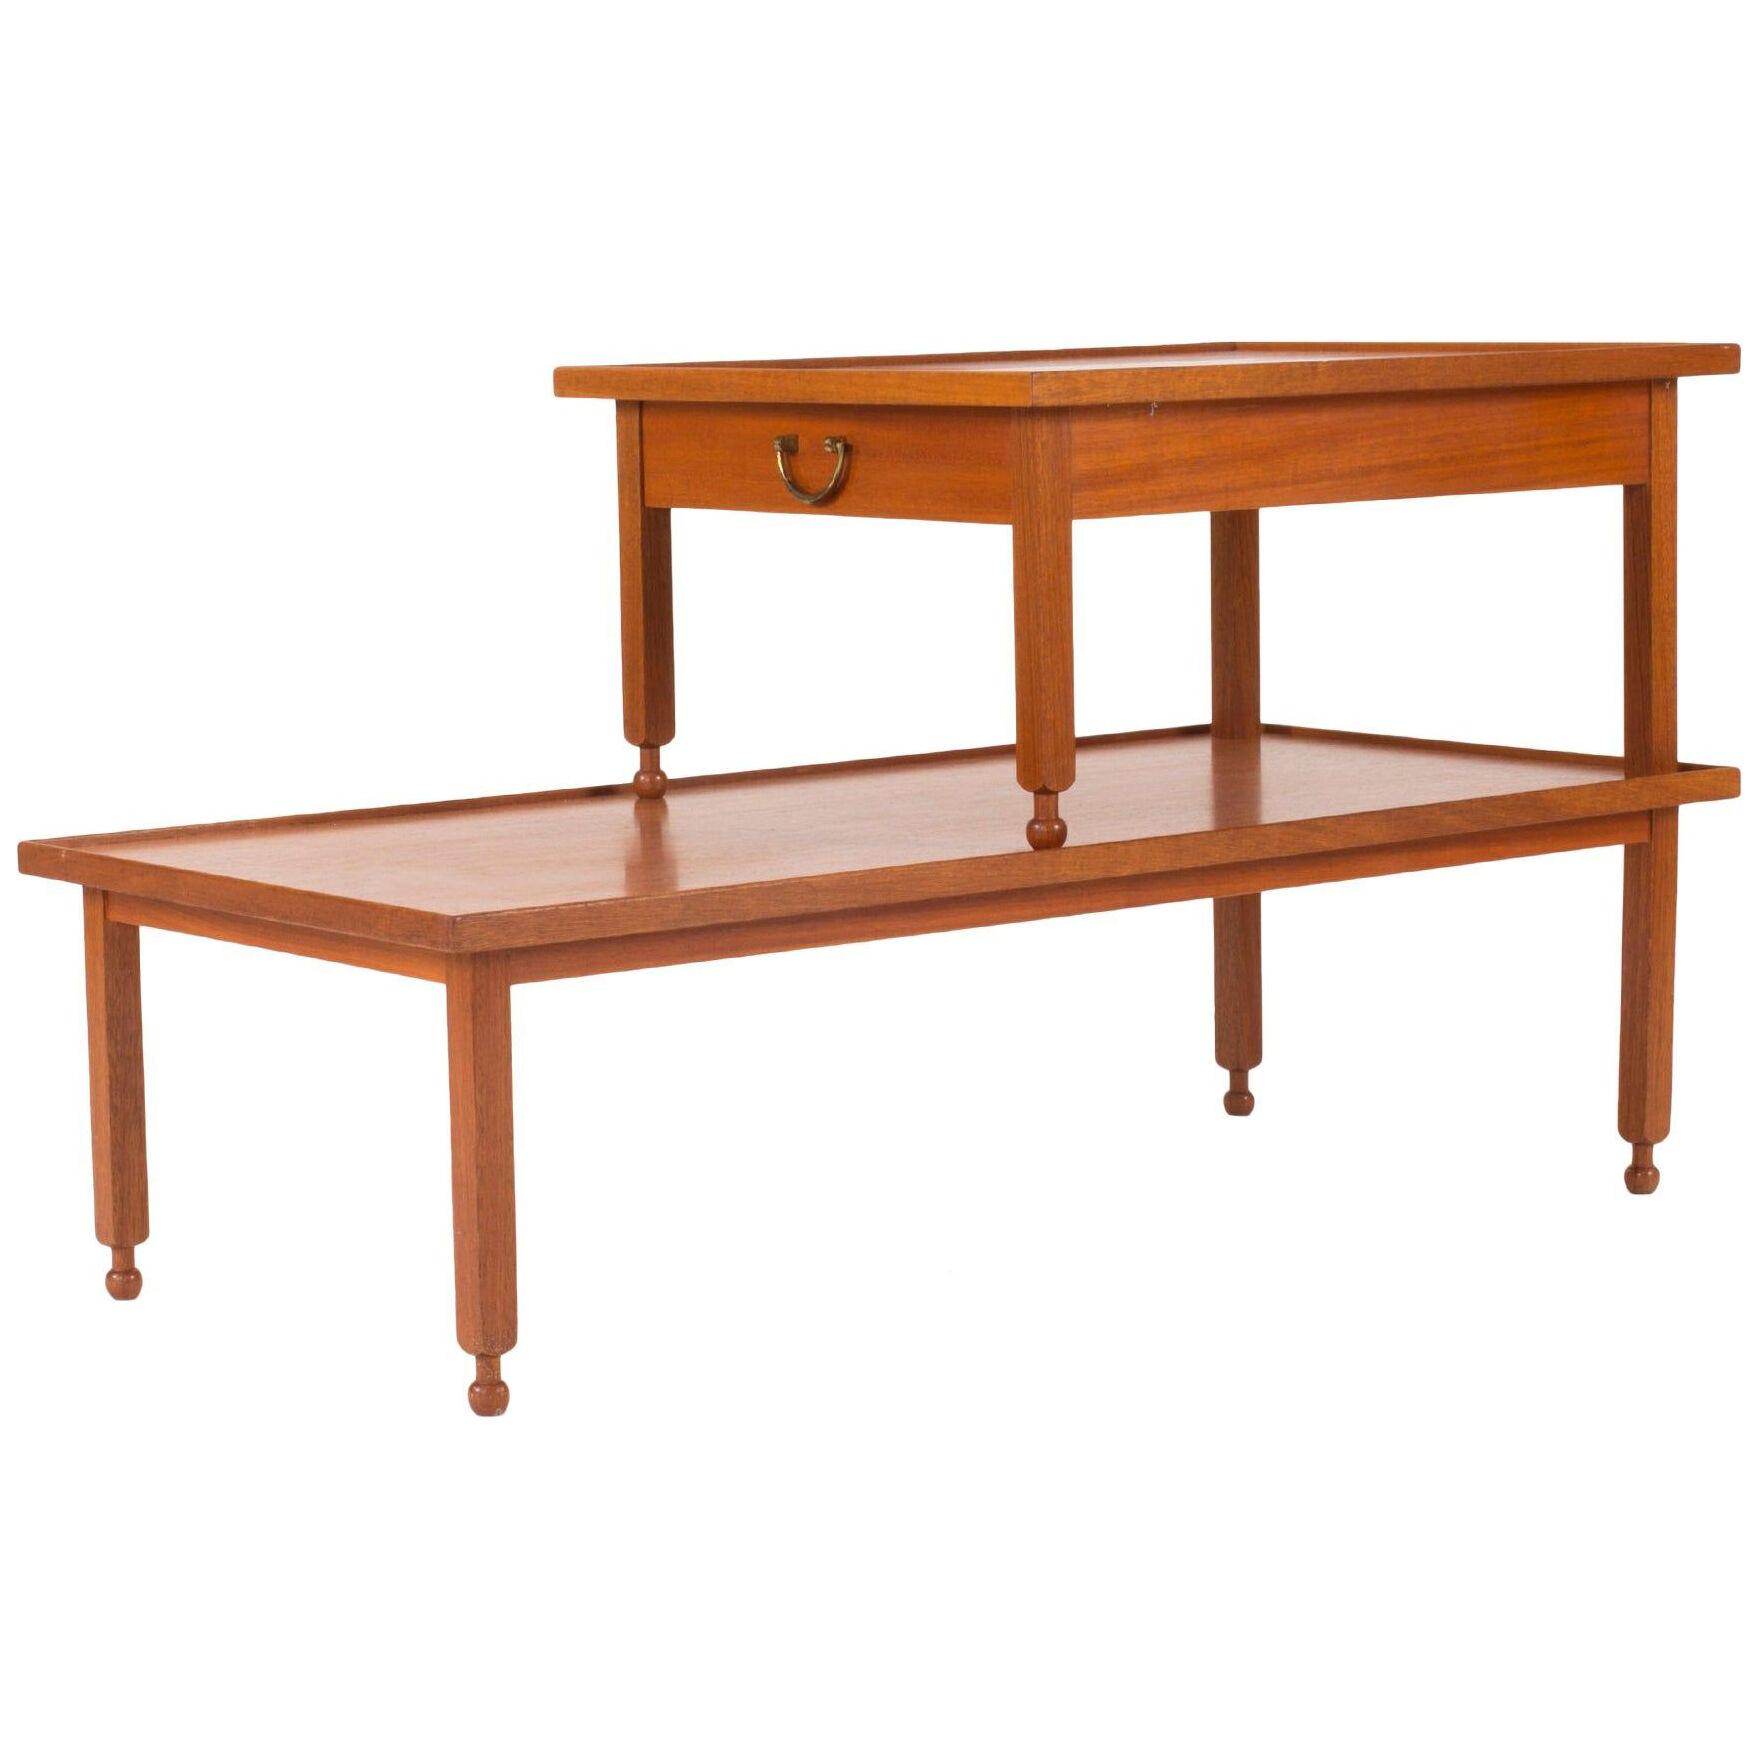 Mahogany Side Table with a Drawer by Josef Frank